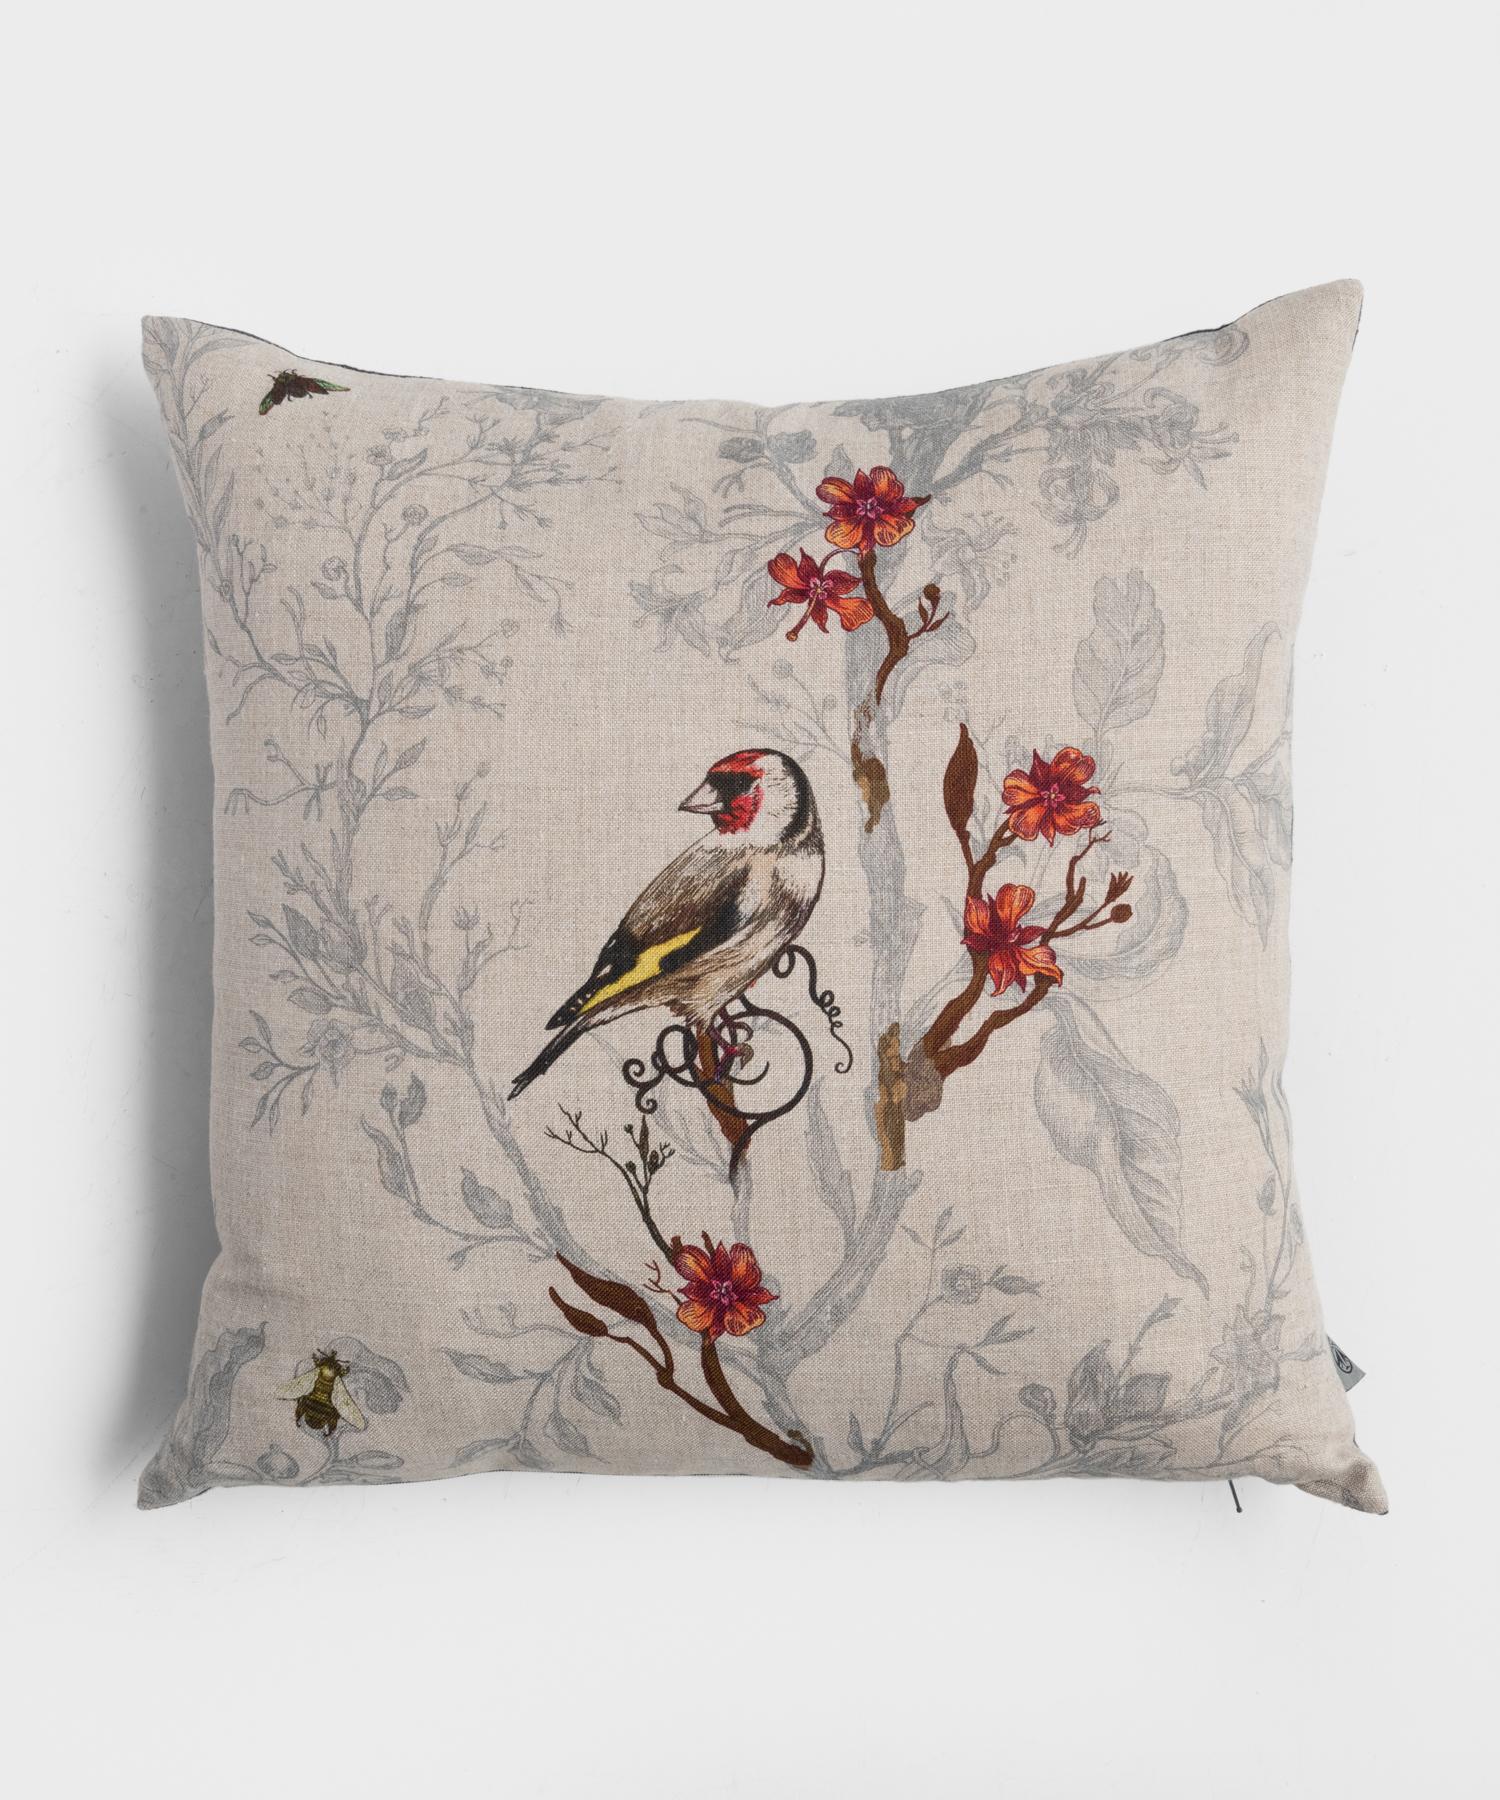 American Birds & Bees Goldfinch Cushion by Timorous Beasties